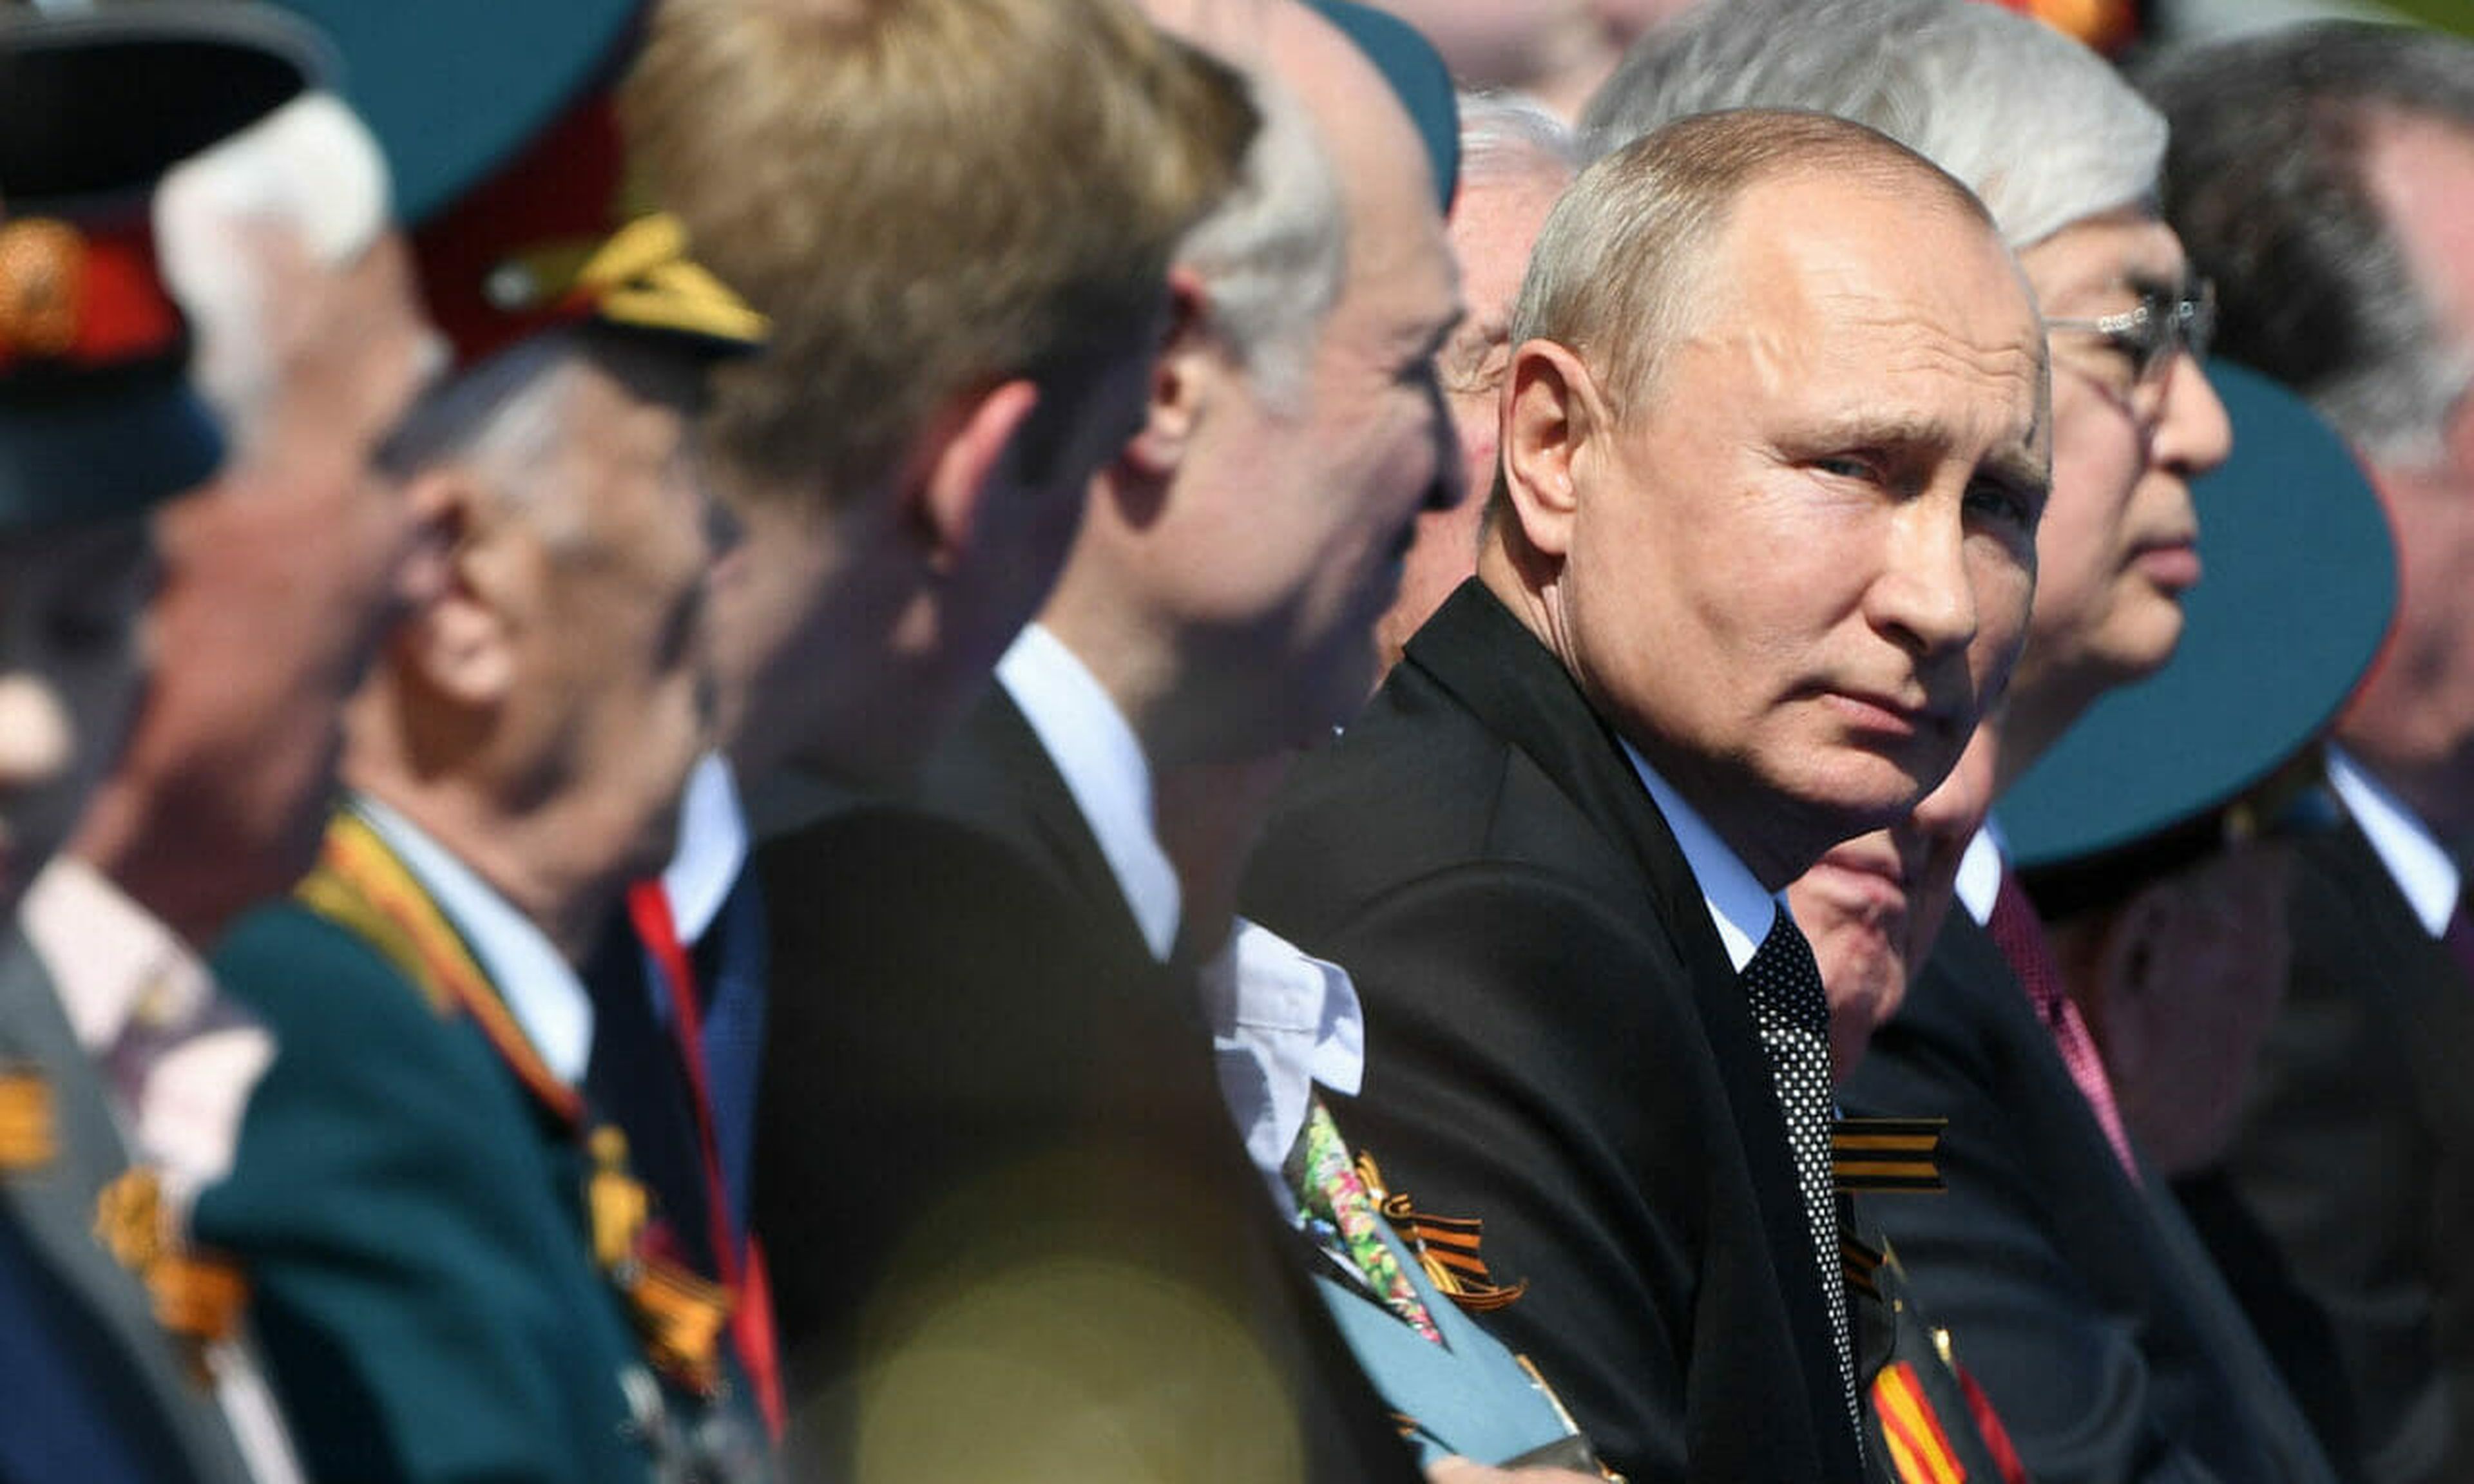 President of Russia Vladimir Putin prior to a military parade in Red Square in Moscow. Today’s columnist, Meredith Bell of AutoRABIT, offers three tips for companies looking to protect their operations from retaliatory cyberattacks from Russia. Sergey Pyatakov / Sputnik